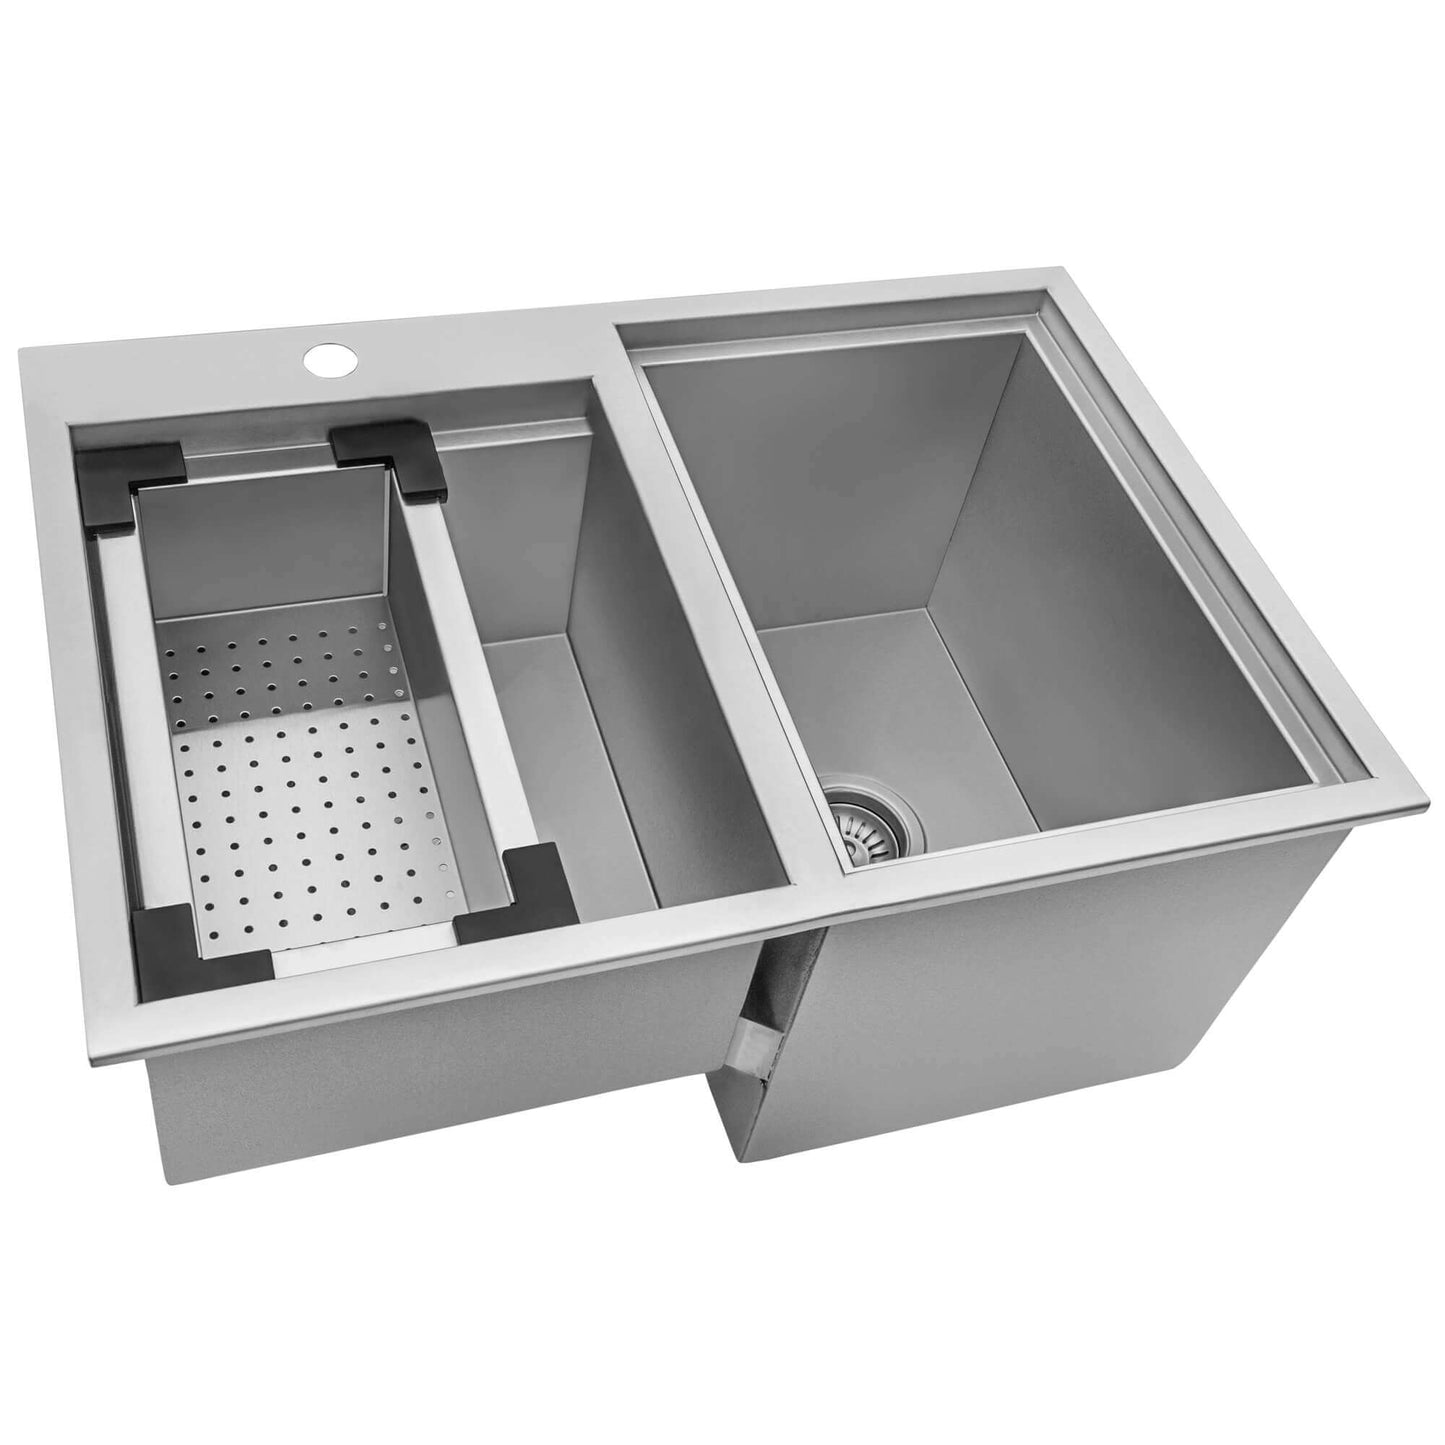 Ruvati Insulated Ice Chest and Outdoor Sink - Showing Uninstalled Product with Included Strainer